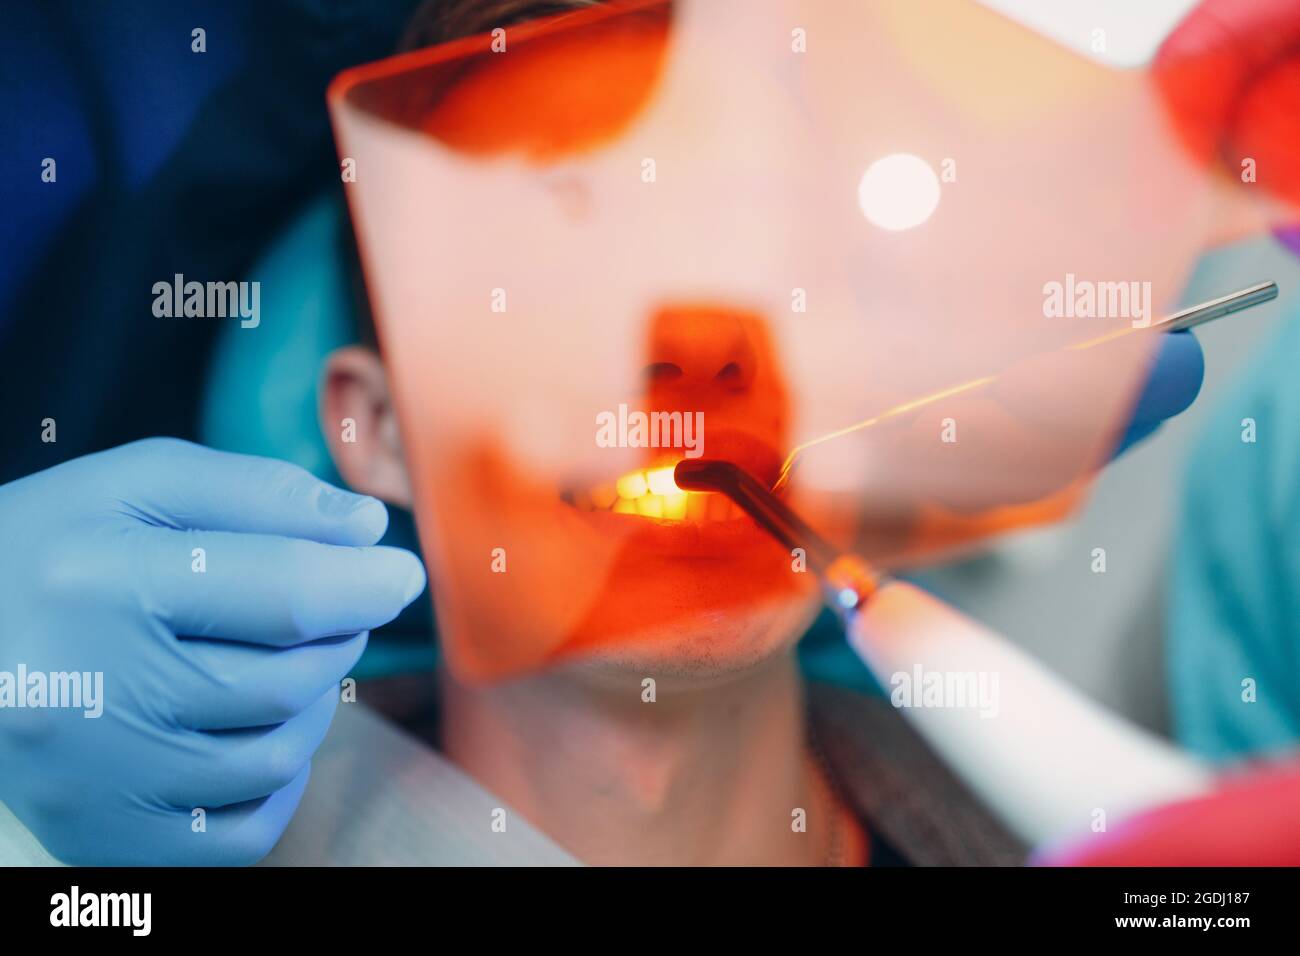 Dentistry. Dentist and patient. Light curing seal. UV dental lamp and orange protect glass. Dental fillings. Stock Photo